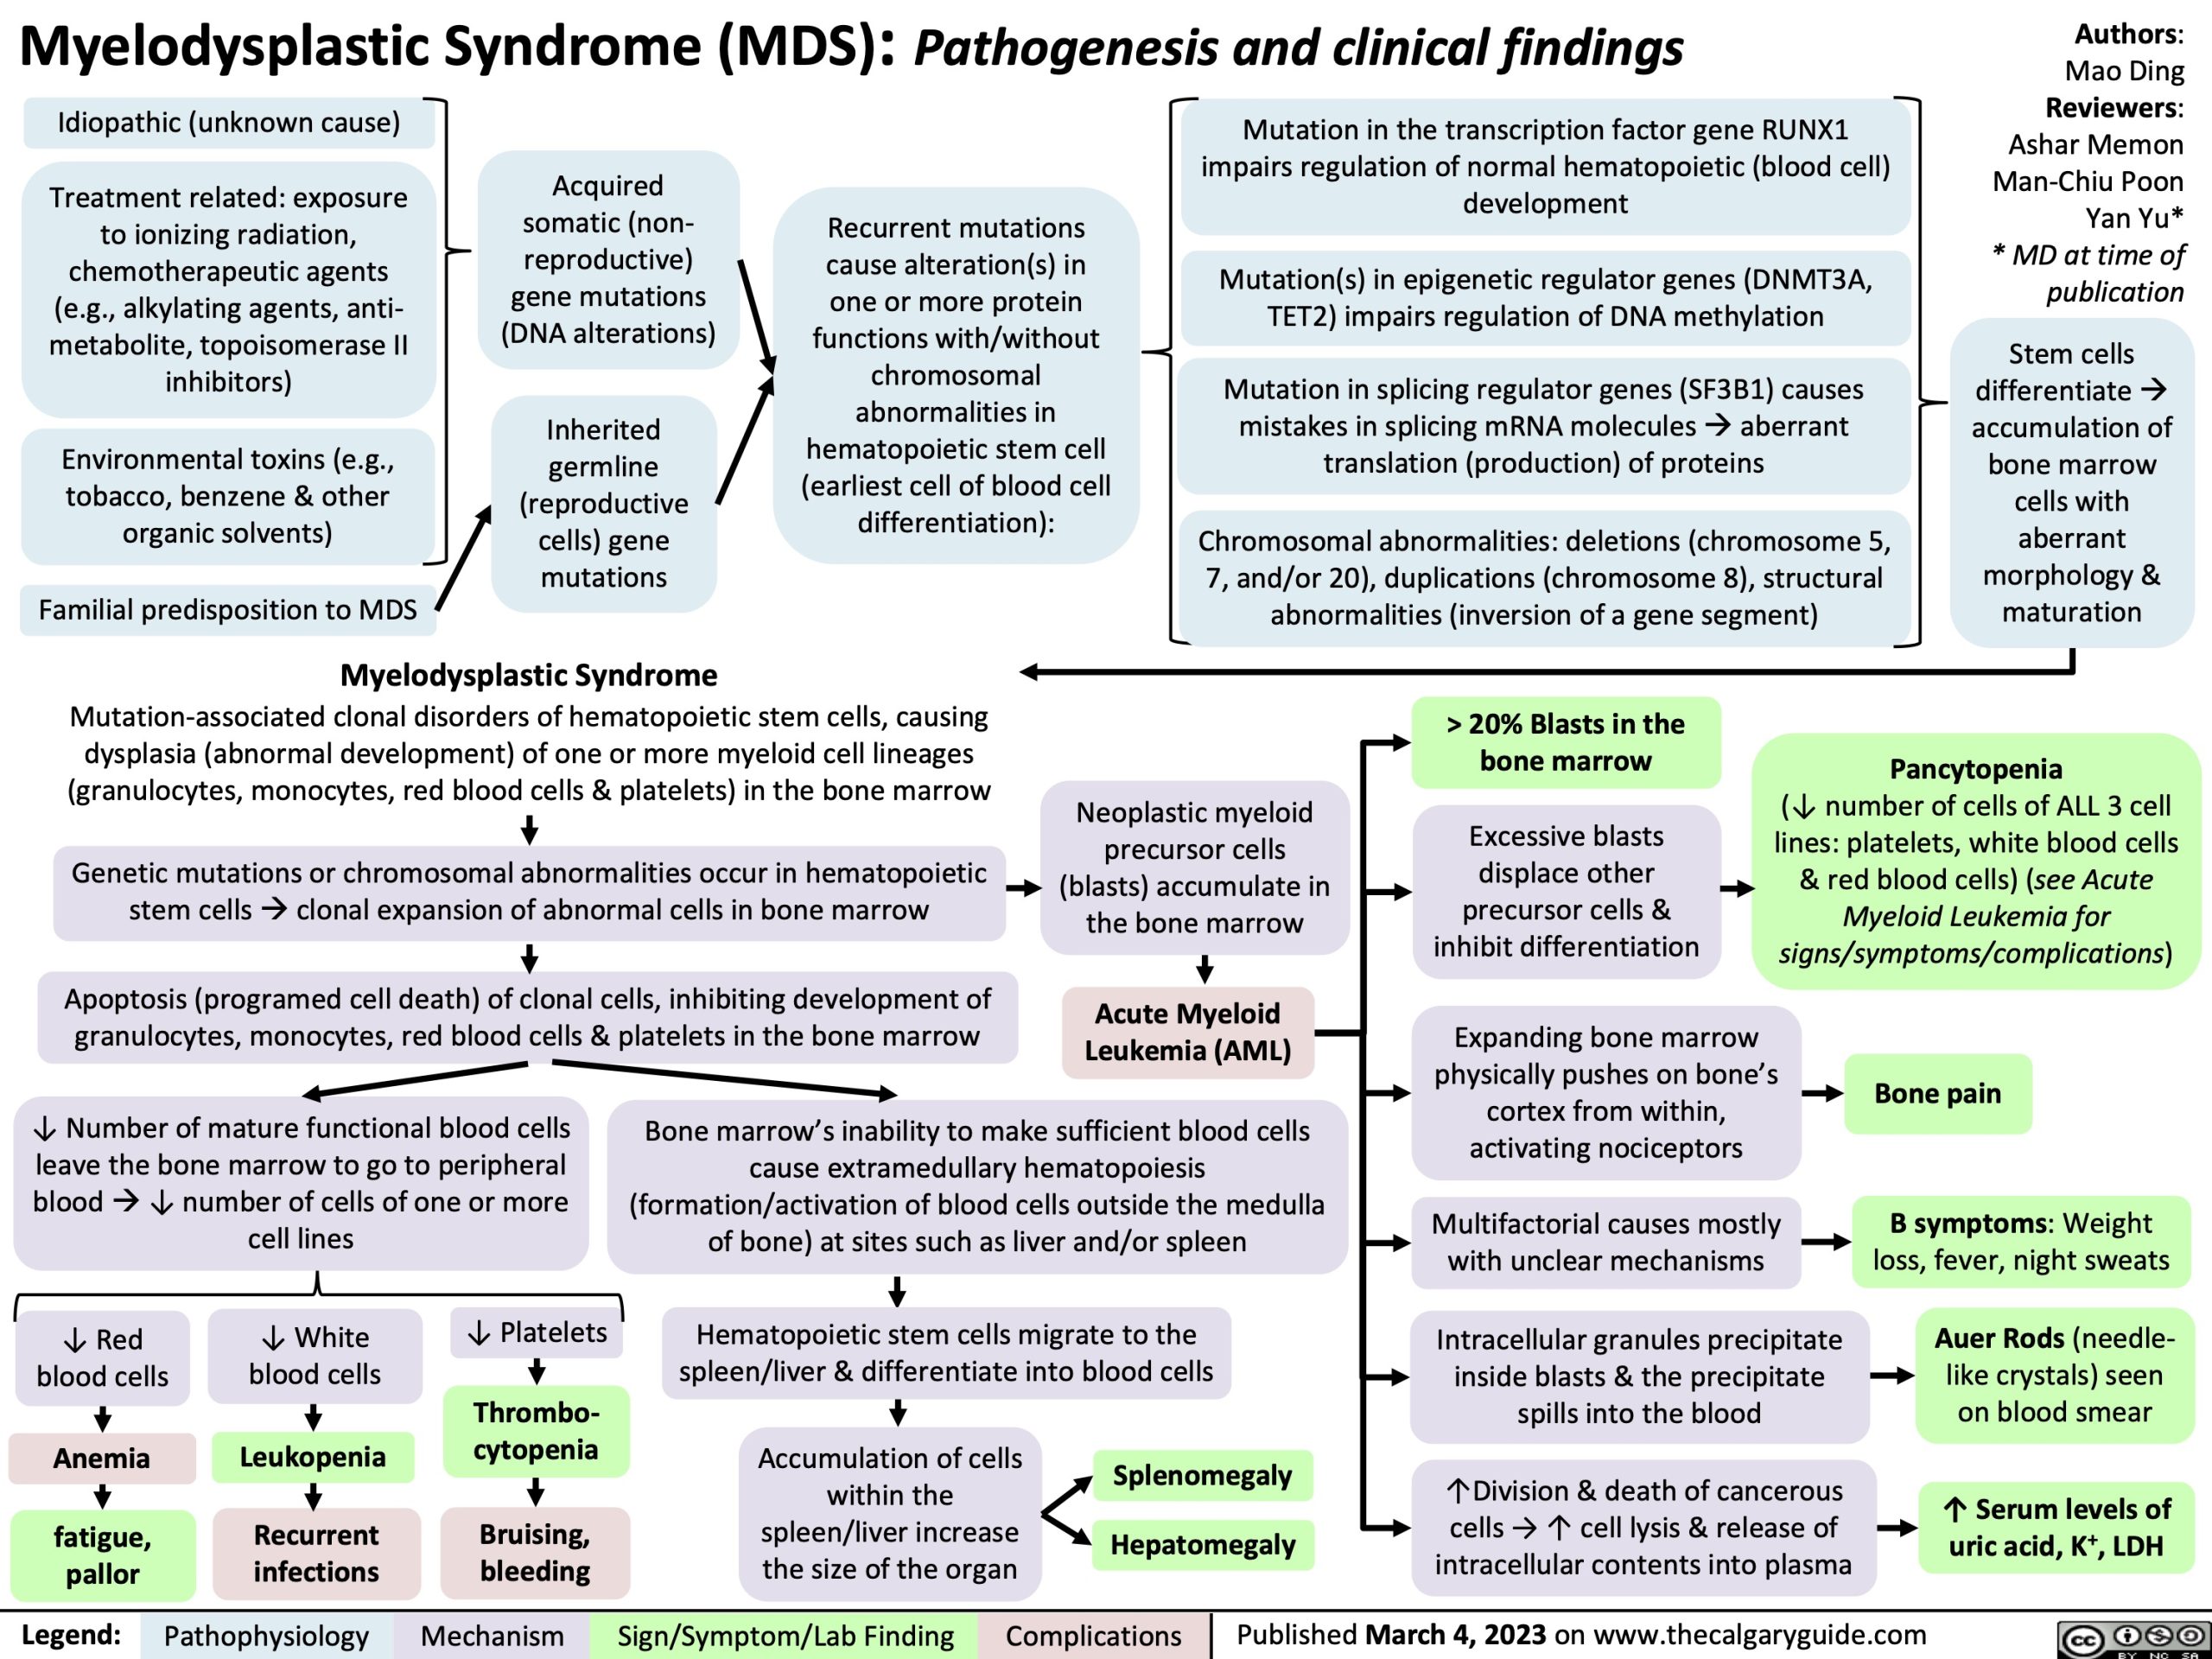 Myelodysplastic Syndrome Pathogenesis and clinical findings